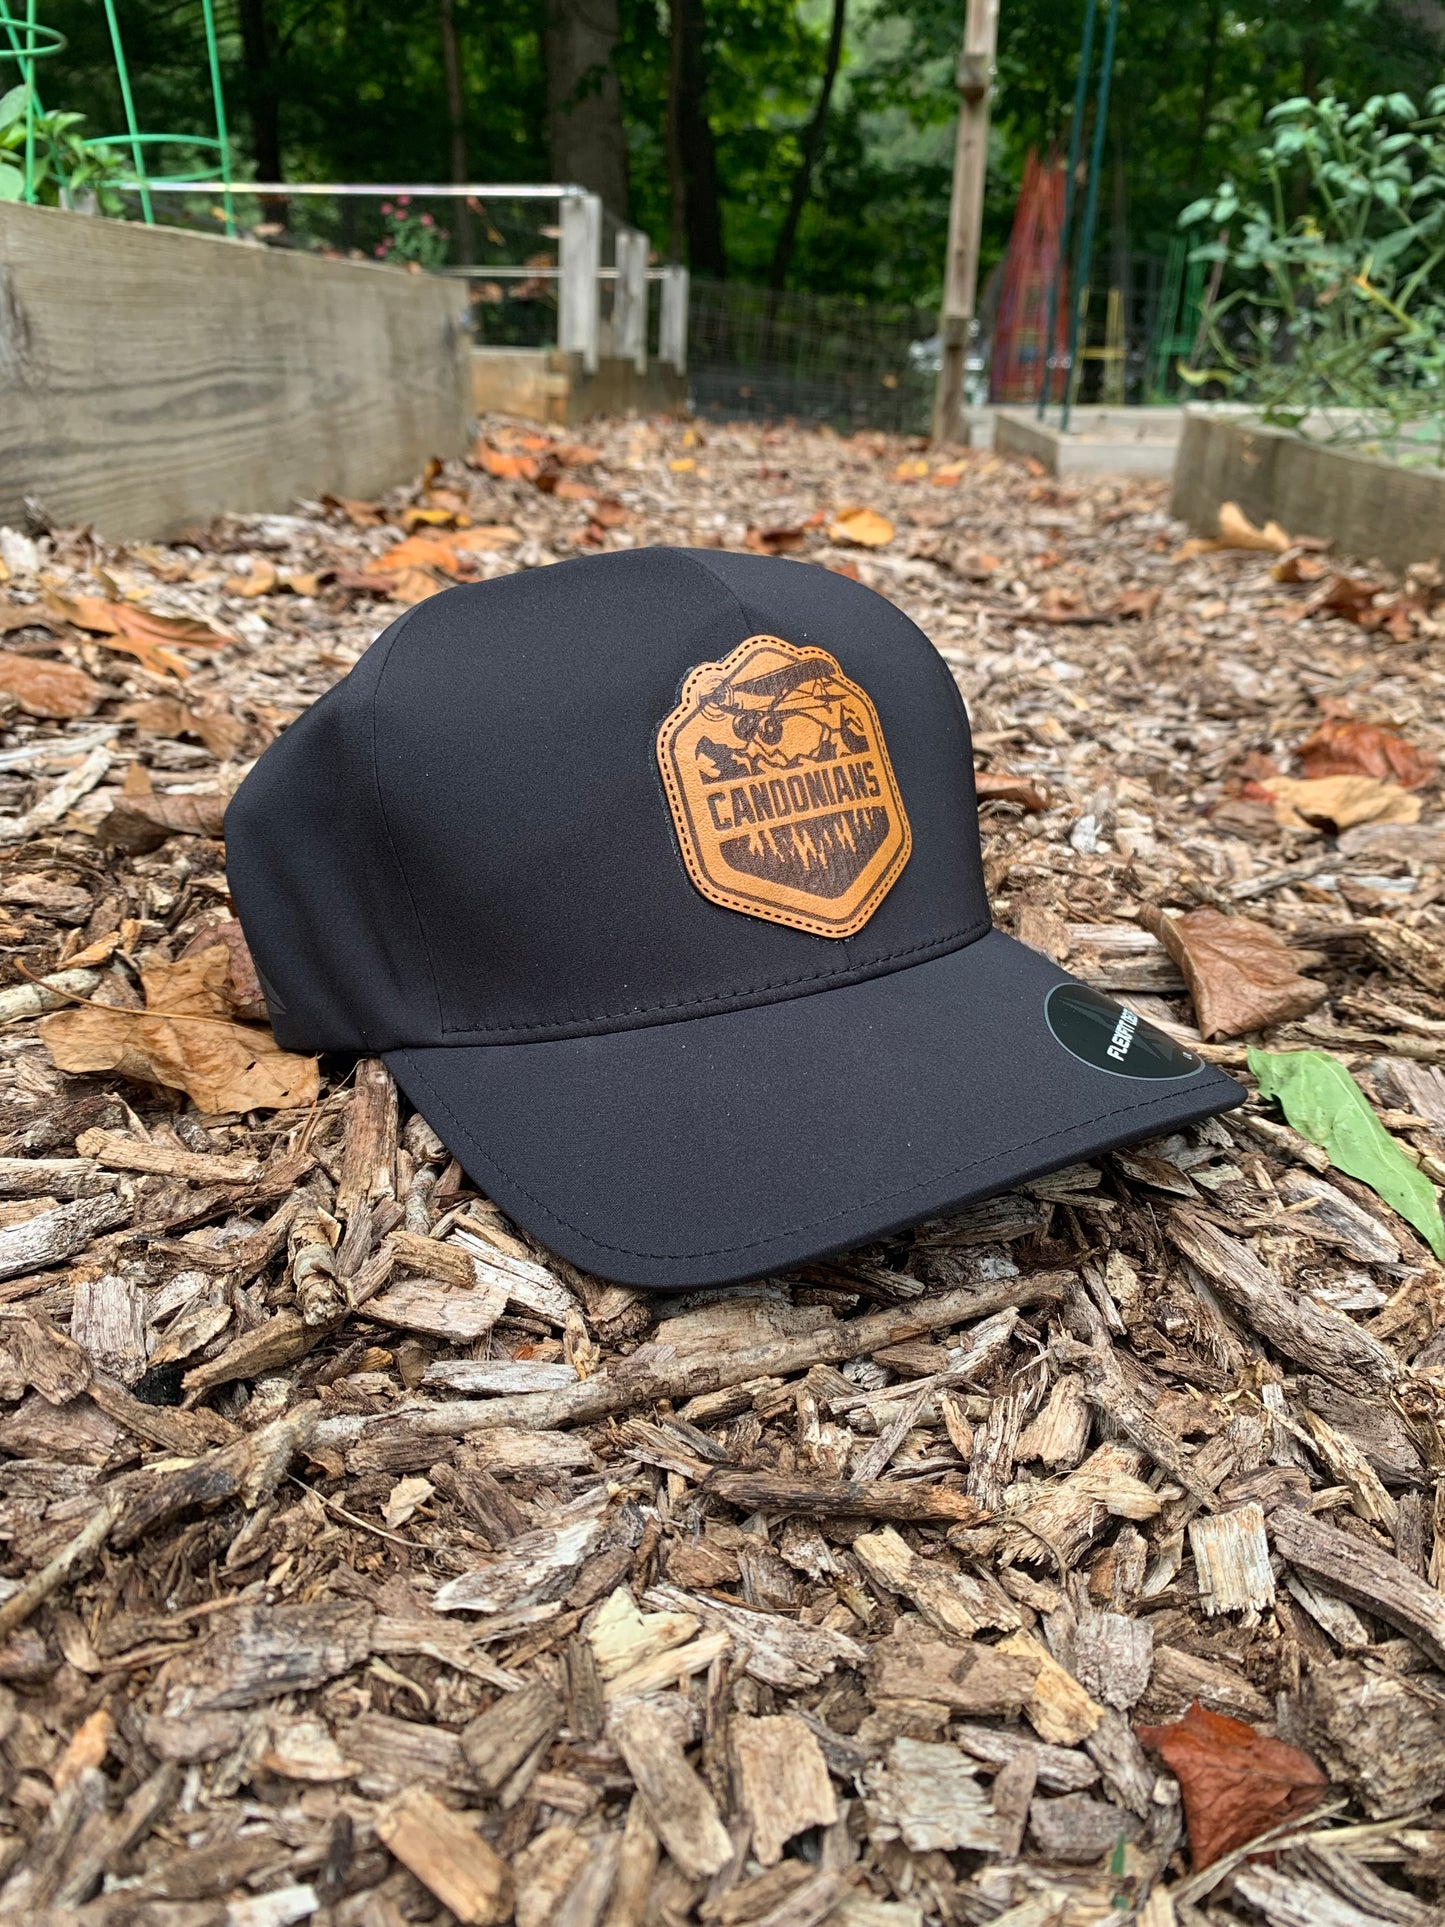 Candonians Exclusive Leather Badge Cap